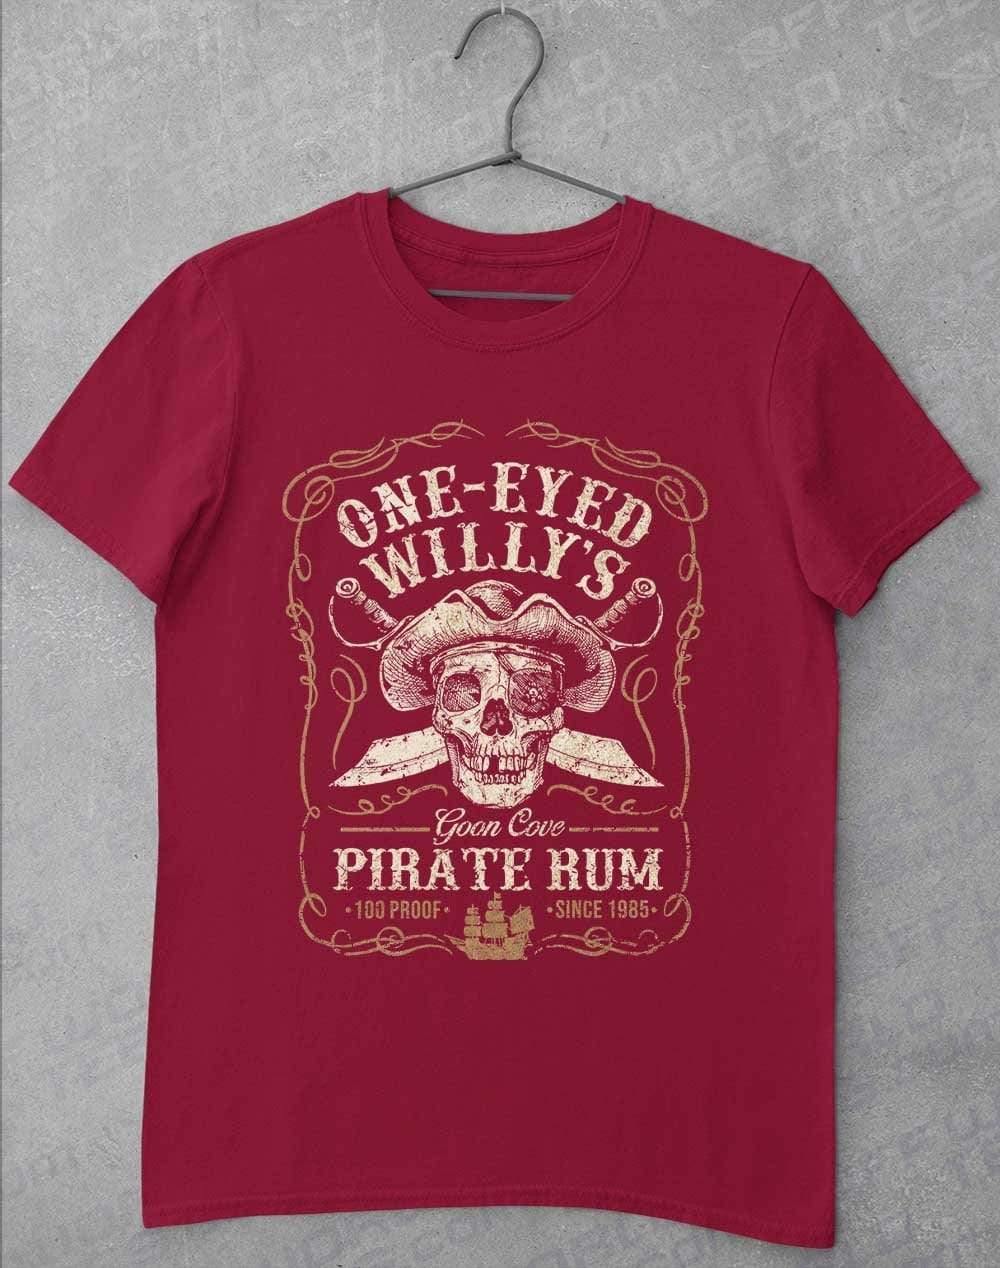 One-Eyed Willy's Goon Cove Rum T-Shirt S / Cardinal Red  - Off World Tees